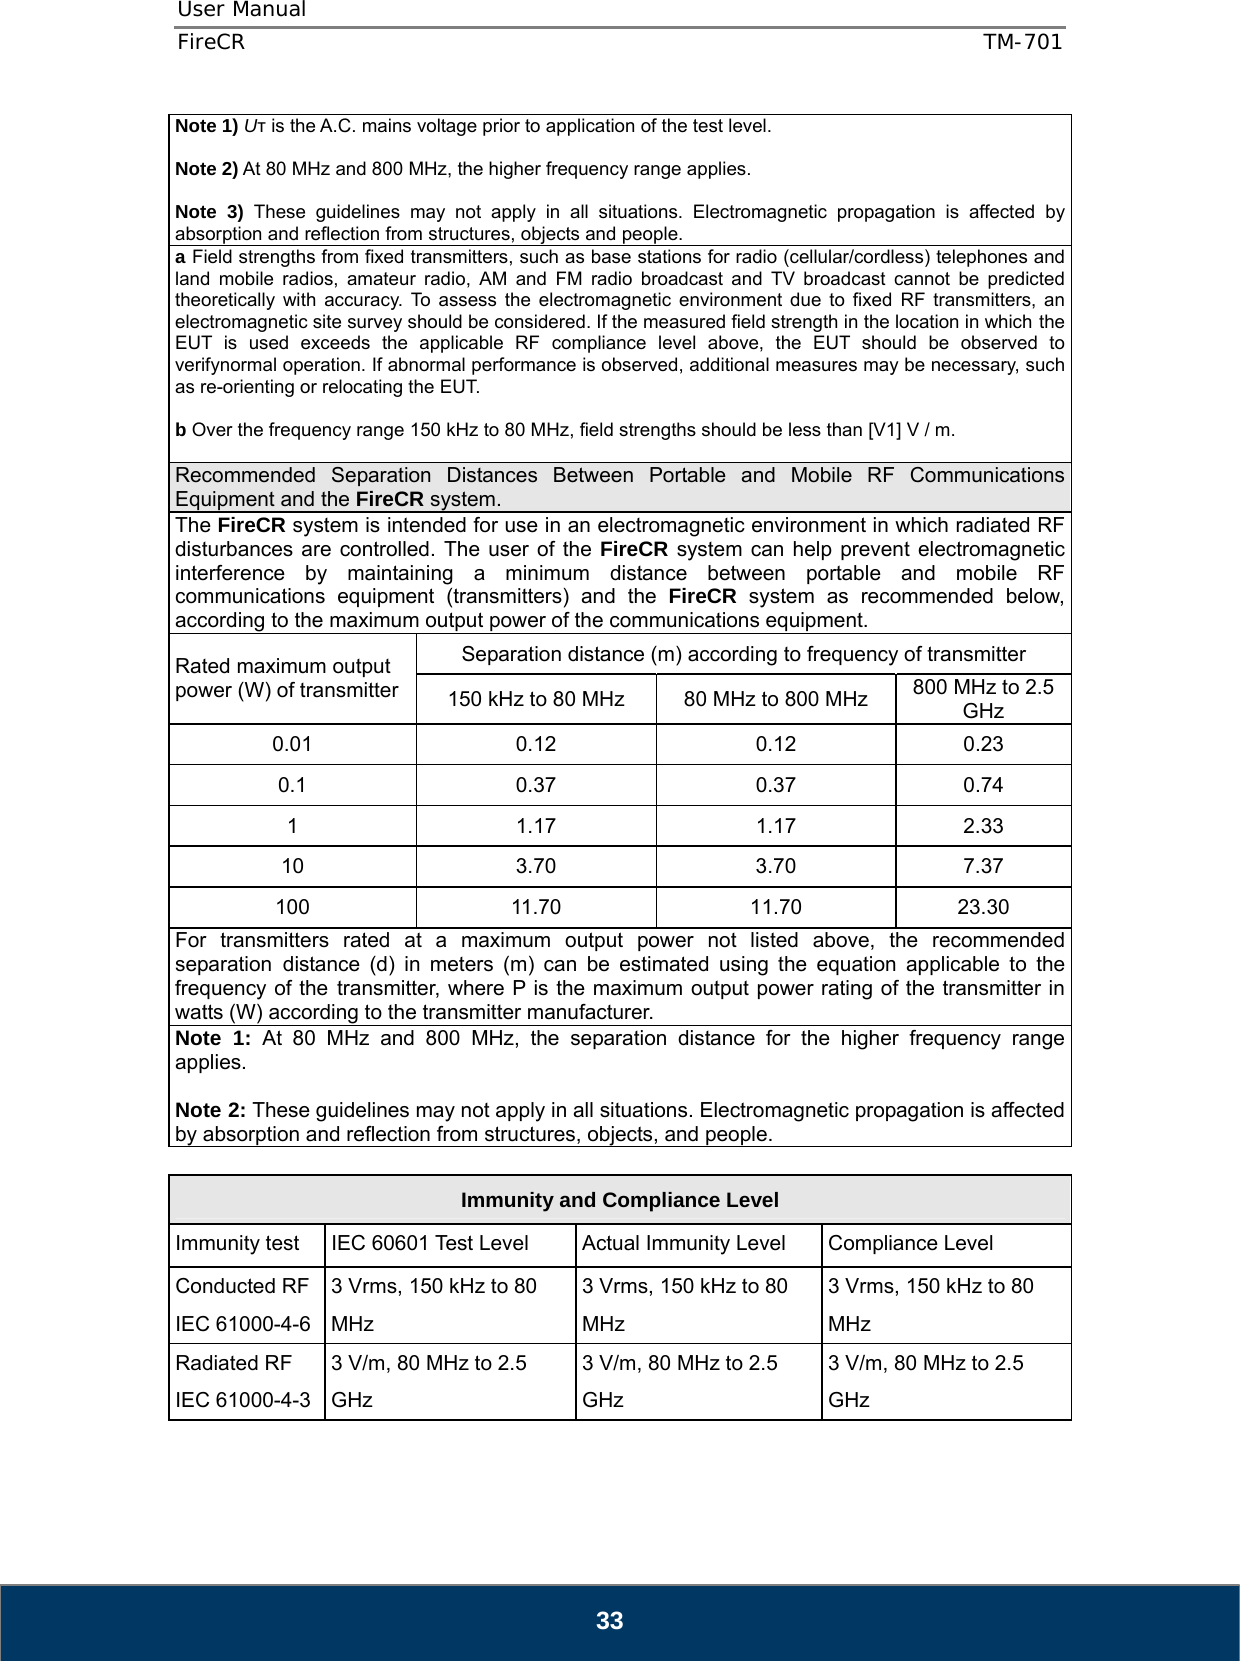 User Manual  FireCR  TM-701   33 Note 1) Uт is the A.C. mains voltage prior to application of the test level.  Note 2) At 80 MHz and 800 MHz, the higher frequency range applies.  Note 3) These guidelines may not apply in all situations. Electromagnetic propagation is affected by absorption and reflection from structures, objects and people. a Field strengths from fixed transmitters, such as base stations for radio (cellular/cordless) telephones and land mobile radios, amateur radio, AM and FM radio broadcast and TV broadcast cannot be predicted theoretically with accuracy. To assess the electromagnetic environment due to fixed RF transmitters, an electromagnetic site survey should be considered. If the measured field strength in the location in which the EUT is used exceeds the applicable RF compliance level above, the EUT should be observed to verifynormal operation. If abnormal performance is observed, additional measures may be necessary, such as re-orienting or relocating the EUT.  b Over the frequency range 150 kHz to 80 MHz, field strengths should be less than [V1] V / m.  Recommended Separation Distances Between Portable and Mobile RF Communications Equipment and the FireCR system. The FireCR system is intended for use in an electromagnetic environment in which radiated RF disturbances are controlled. The user of the FireCR system can help prevent electromagnetic interference by maintaining a minimum distance between portable and mobile RF communications equipment (transmitters) and the FireCR system as recommended below, according to the maximum output power of the communications equipment. Rated maximum output power (W) of transmitter Separation distance (m) according to frequency of transmitter 150 kHz to 80 MHz  80 MHz to 800 MHz  800 MHz to 2.5 GHz 0.01 0.12 0.12 0.23 0.1 0.37 0.37 0.74 1 1.17 1.17 2.33 10 3.70 3.70 7.37 100 11.70 11.70 23.30 For transmitters rated at a maximum output power not listed above, the recommended separation distance (d) in meters (m) can be estimated using the equation applicable to the frequency of the transmitter, where P is the maximum output power rating of the transmitter in watts (W) according to the transmitter manufacturer. Note 1: At 80 MHz and 800 MHz, the separation distance for the higher frequency range applies.  Note 2: These guidelines may not apply in all situations. Electromagnetic propagation is affected by absorption and reflection from structures, objects, and people.   Immunity and Compliance Level Immunity test  IEC 60601 Test Level  Actual Immunity Level  Compliance Level Conducted RF IEC 61000-4-6 3 Vrms, 150 kHz to 80 MHz 3 Vrms, 150 kHz to 80 MHz 3 Vrms, 150 kHz to 80 MHz Radiated RF IEC 61000-4-3 3 V/m, 80 MHz to 2.5 GHz 3 V/m, 80 MHz to 2.5 GHz 3 V/m, 80 MHz to 2.5 GHz   